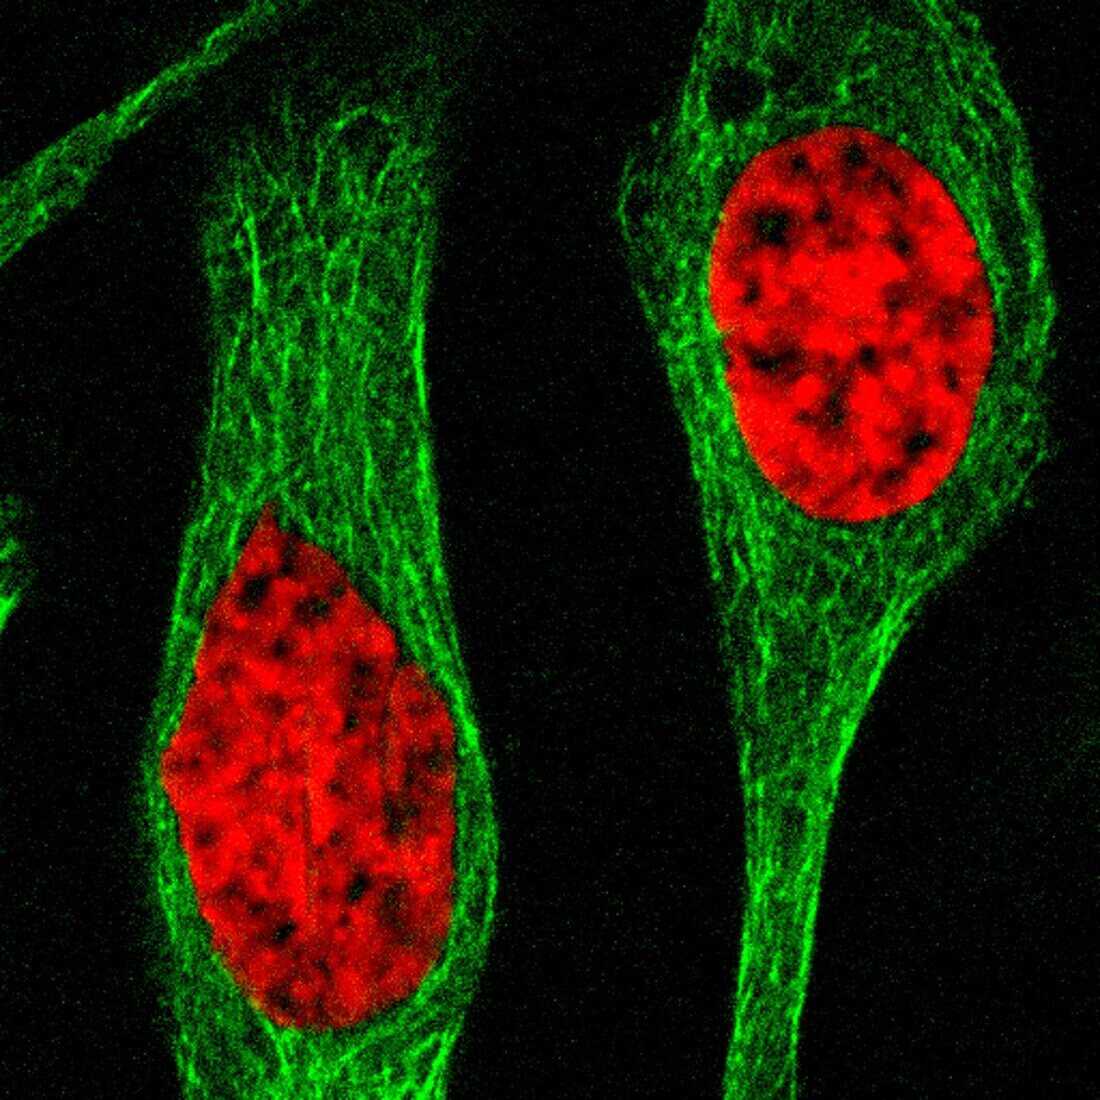 Two human cells in interphase, light micrograph